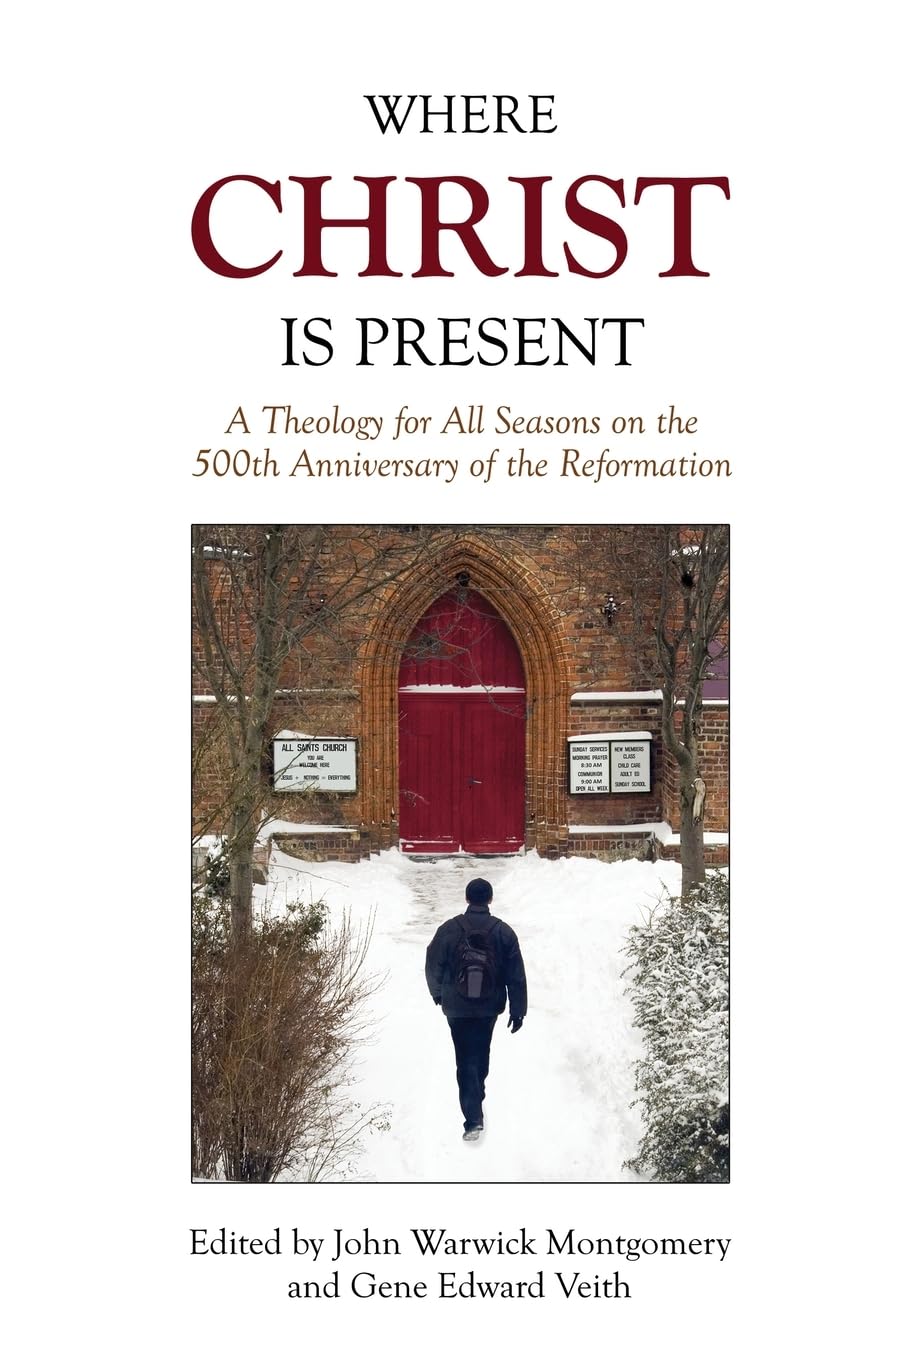 Where Christ Is Present: A Theology for All Seasons on the 500th Anniversary of the Reformation